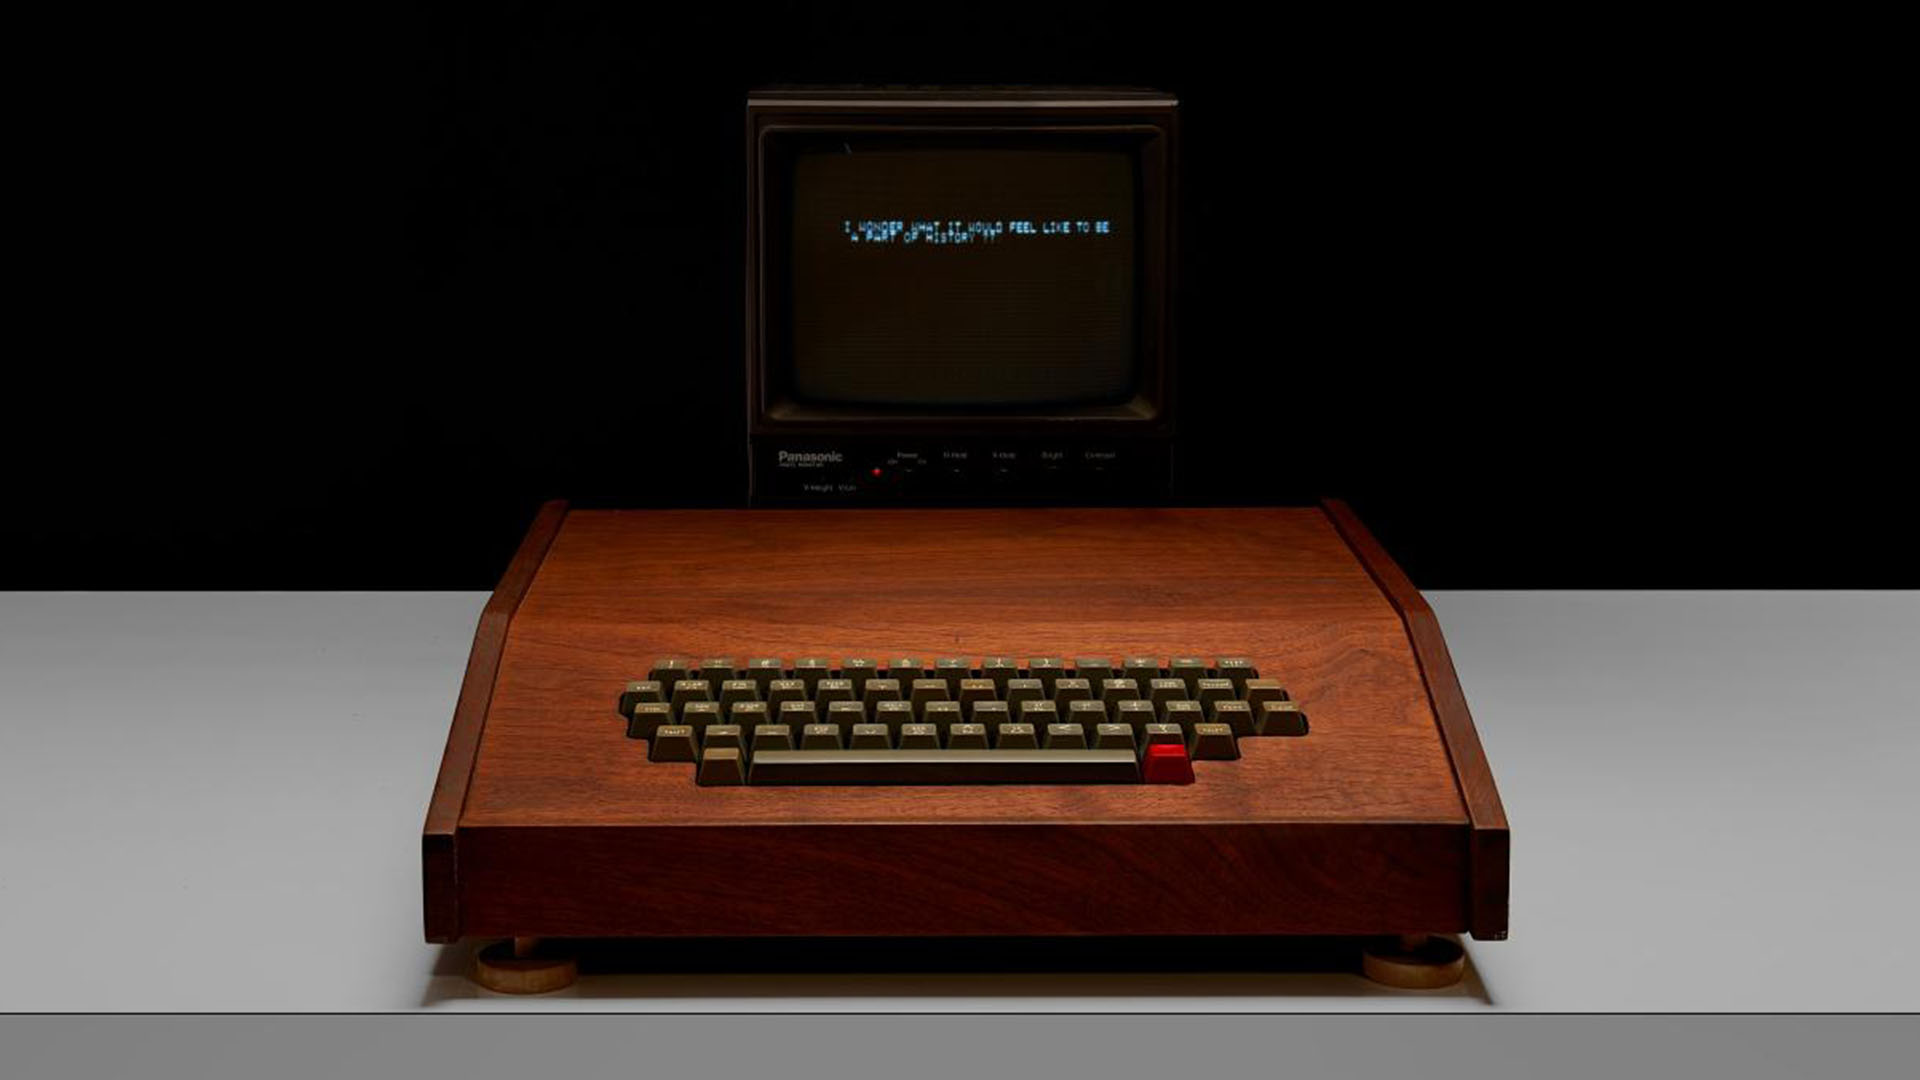 This Apple-1 computer just sold for $500,000. Image: John Moran Auctioneers.